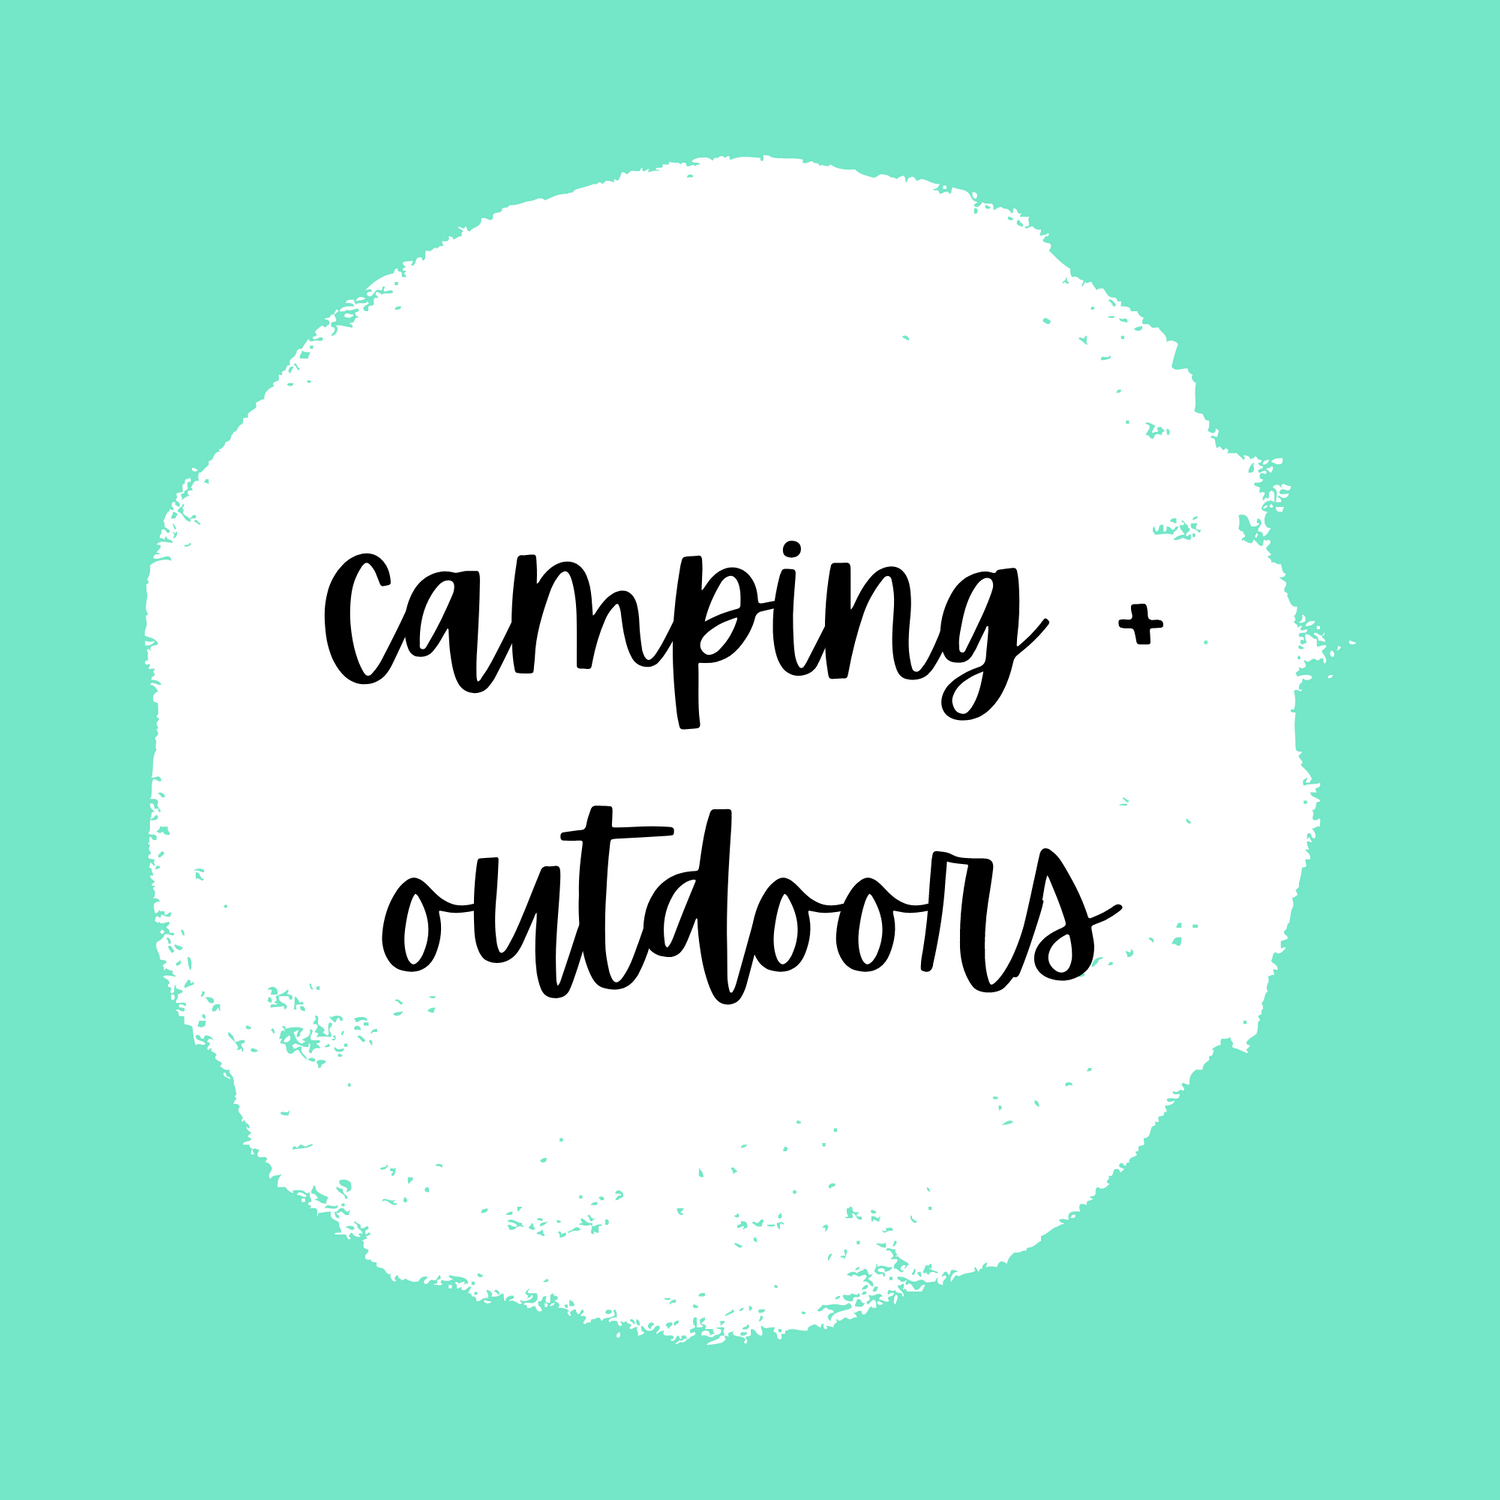 Camping + Outdoors